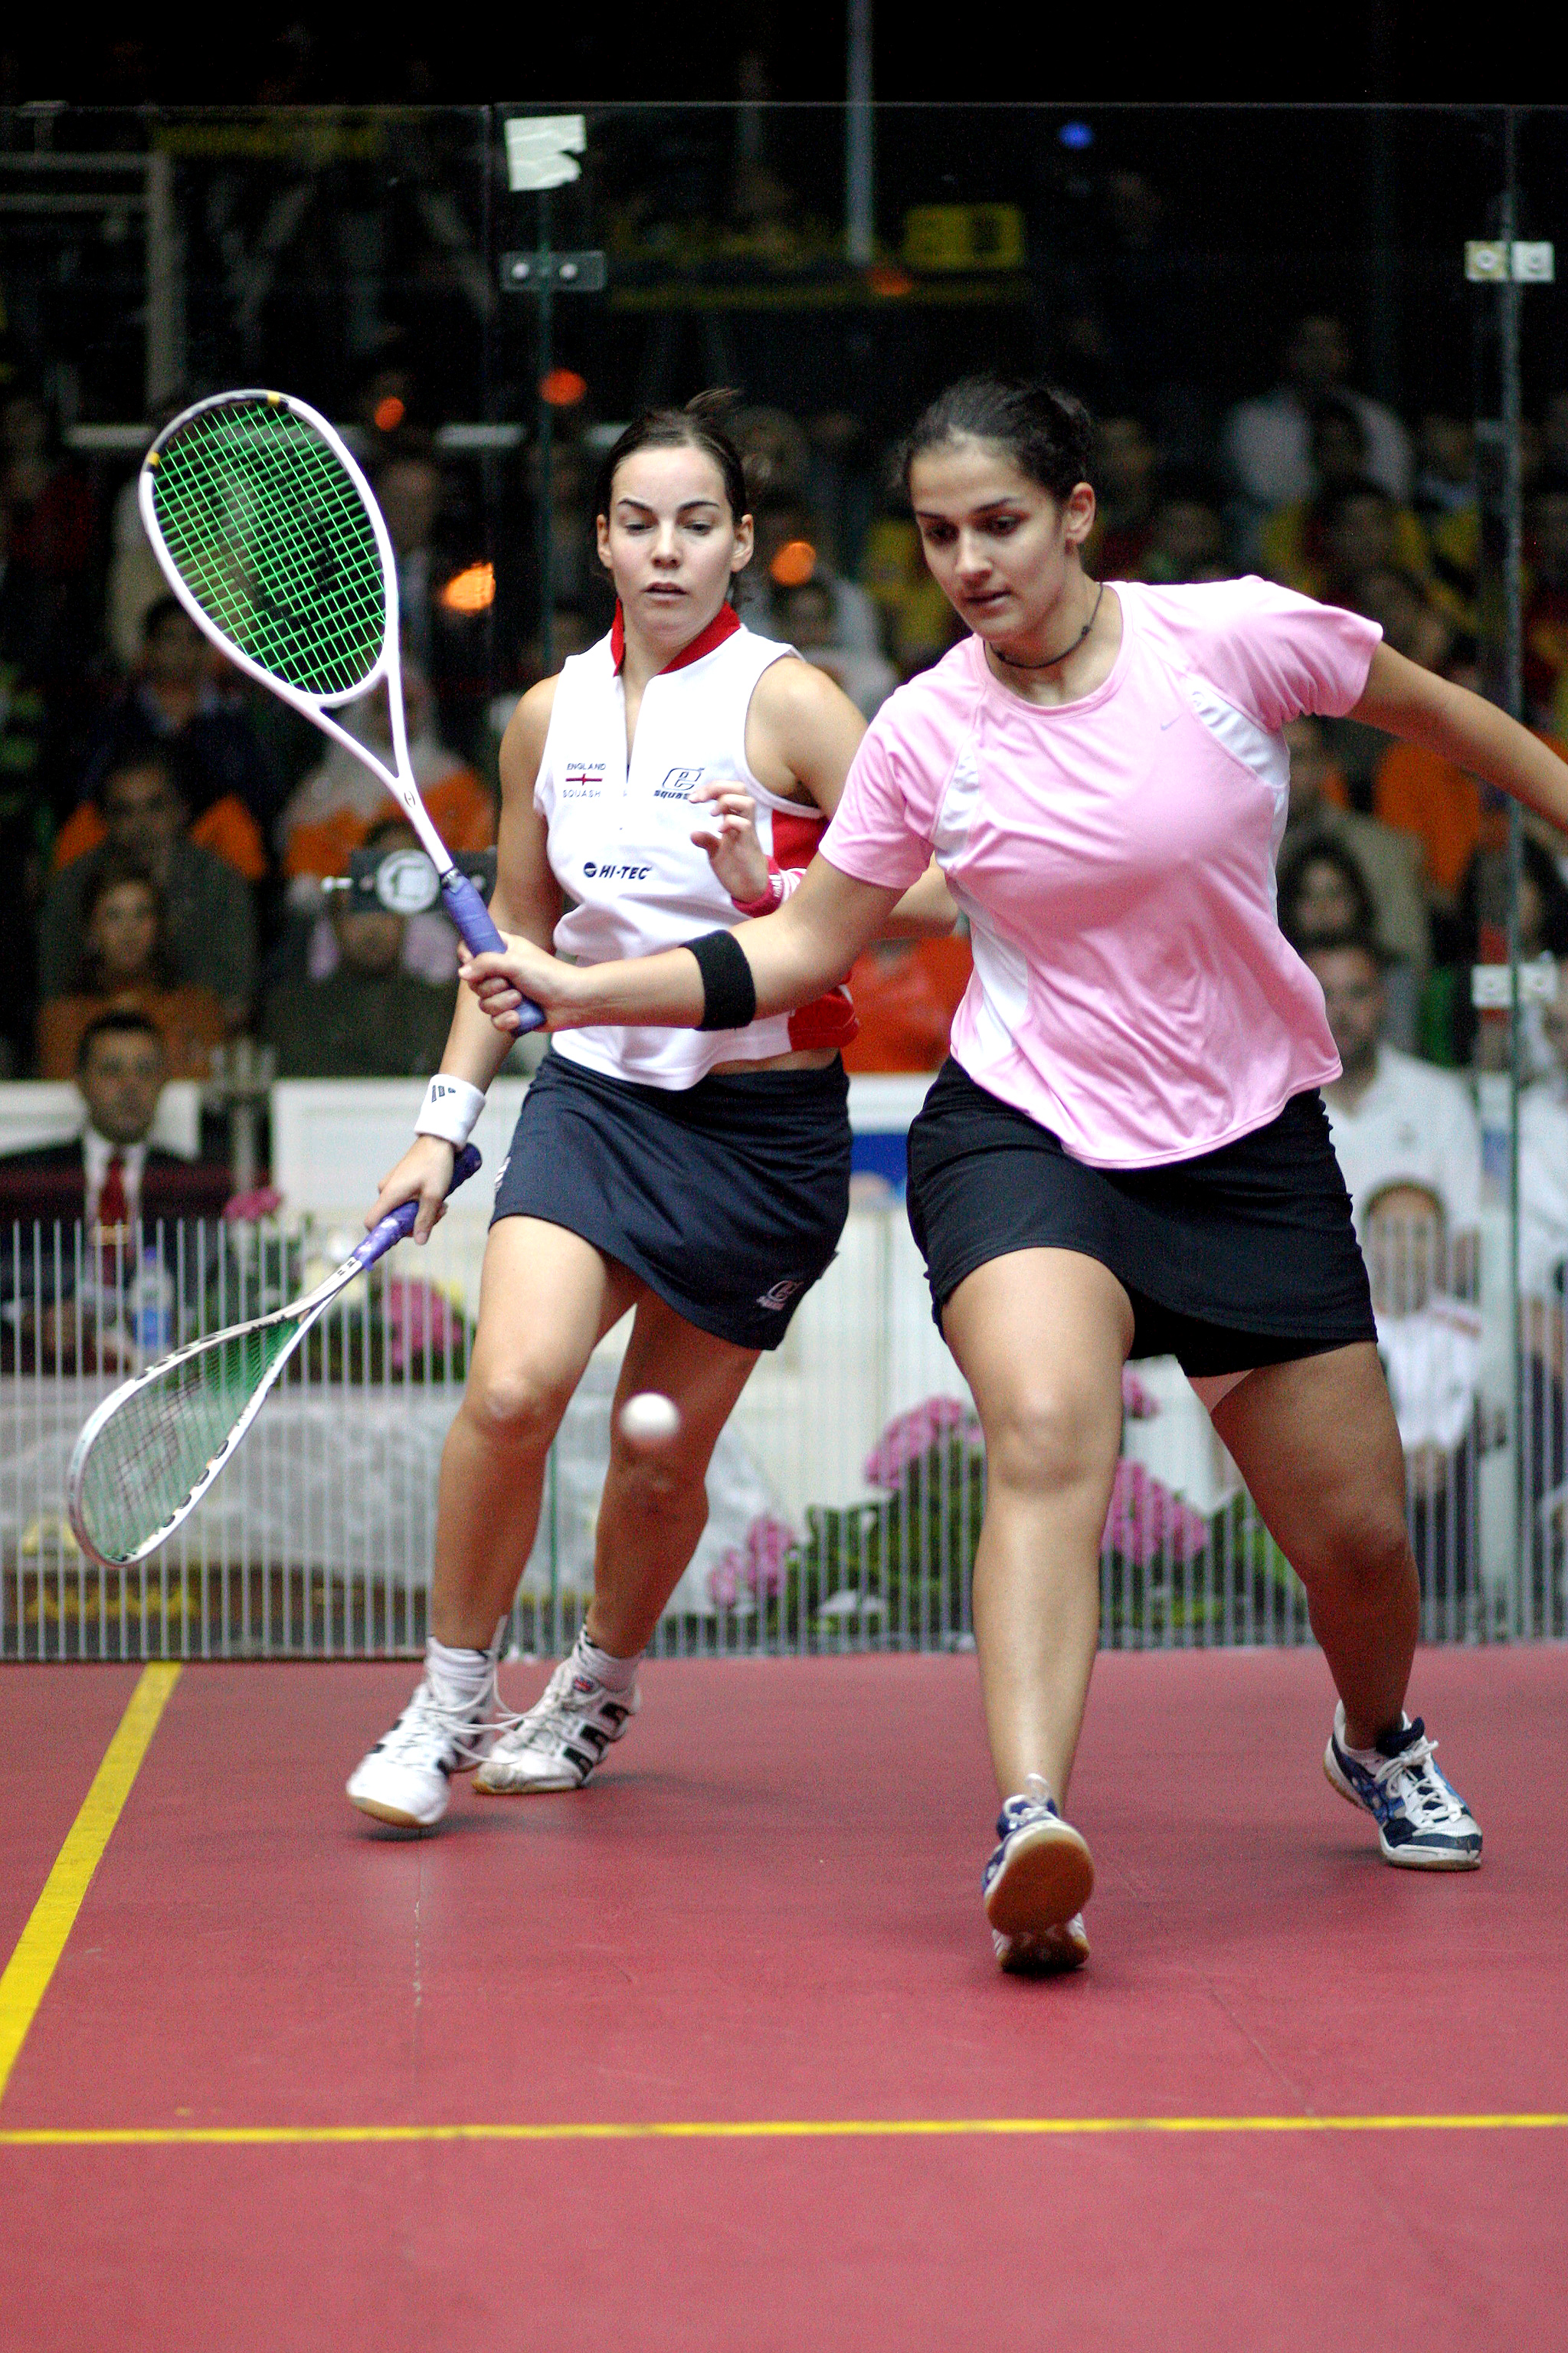 In 2006, Egypt's Omneya Abdel Kawy suffered a leg injury in her team's semifinal match against Malaysia. As a result, she all-but-defaulted in Egypt's final again England. This time around, Abdel Kawy made up for that disappointment by upsetting Jenny Duncalf in a methodical three games. 